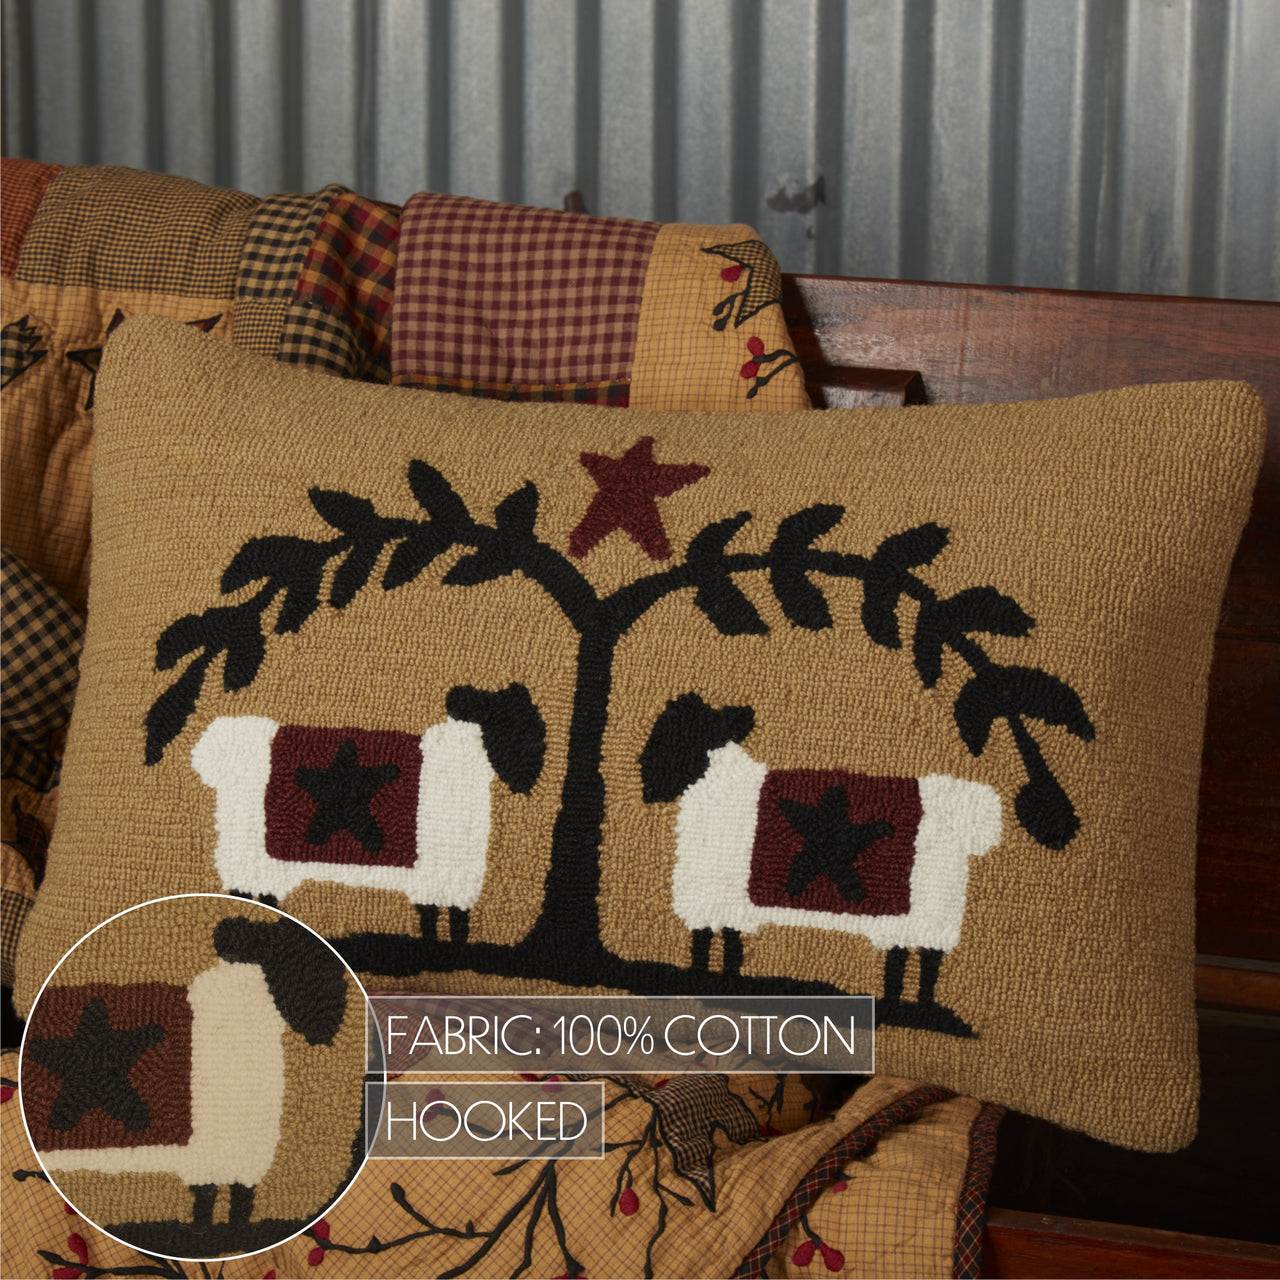 Heritage Farms Sheep and Star Hooked Pillow 14"x22" - VHC Brands